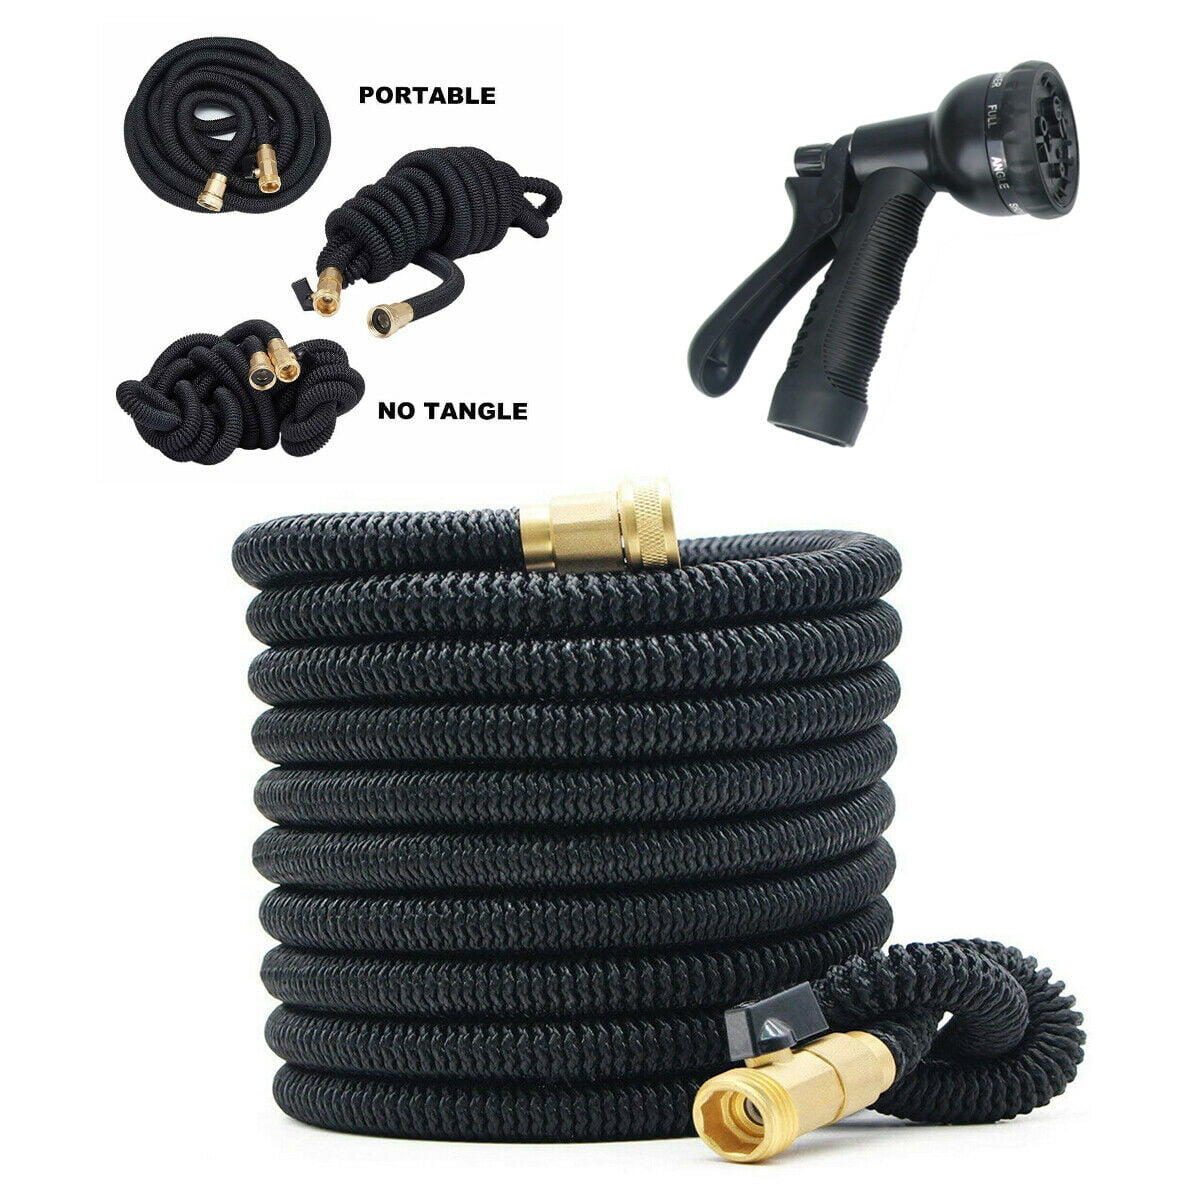 5 in 1 Deluxe 25 75 Ft Expandable Flexible Garden Water Hose Holder Spray Nozzle 